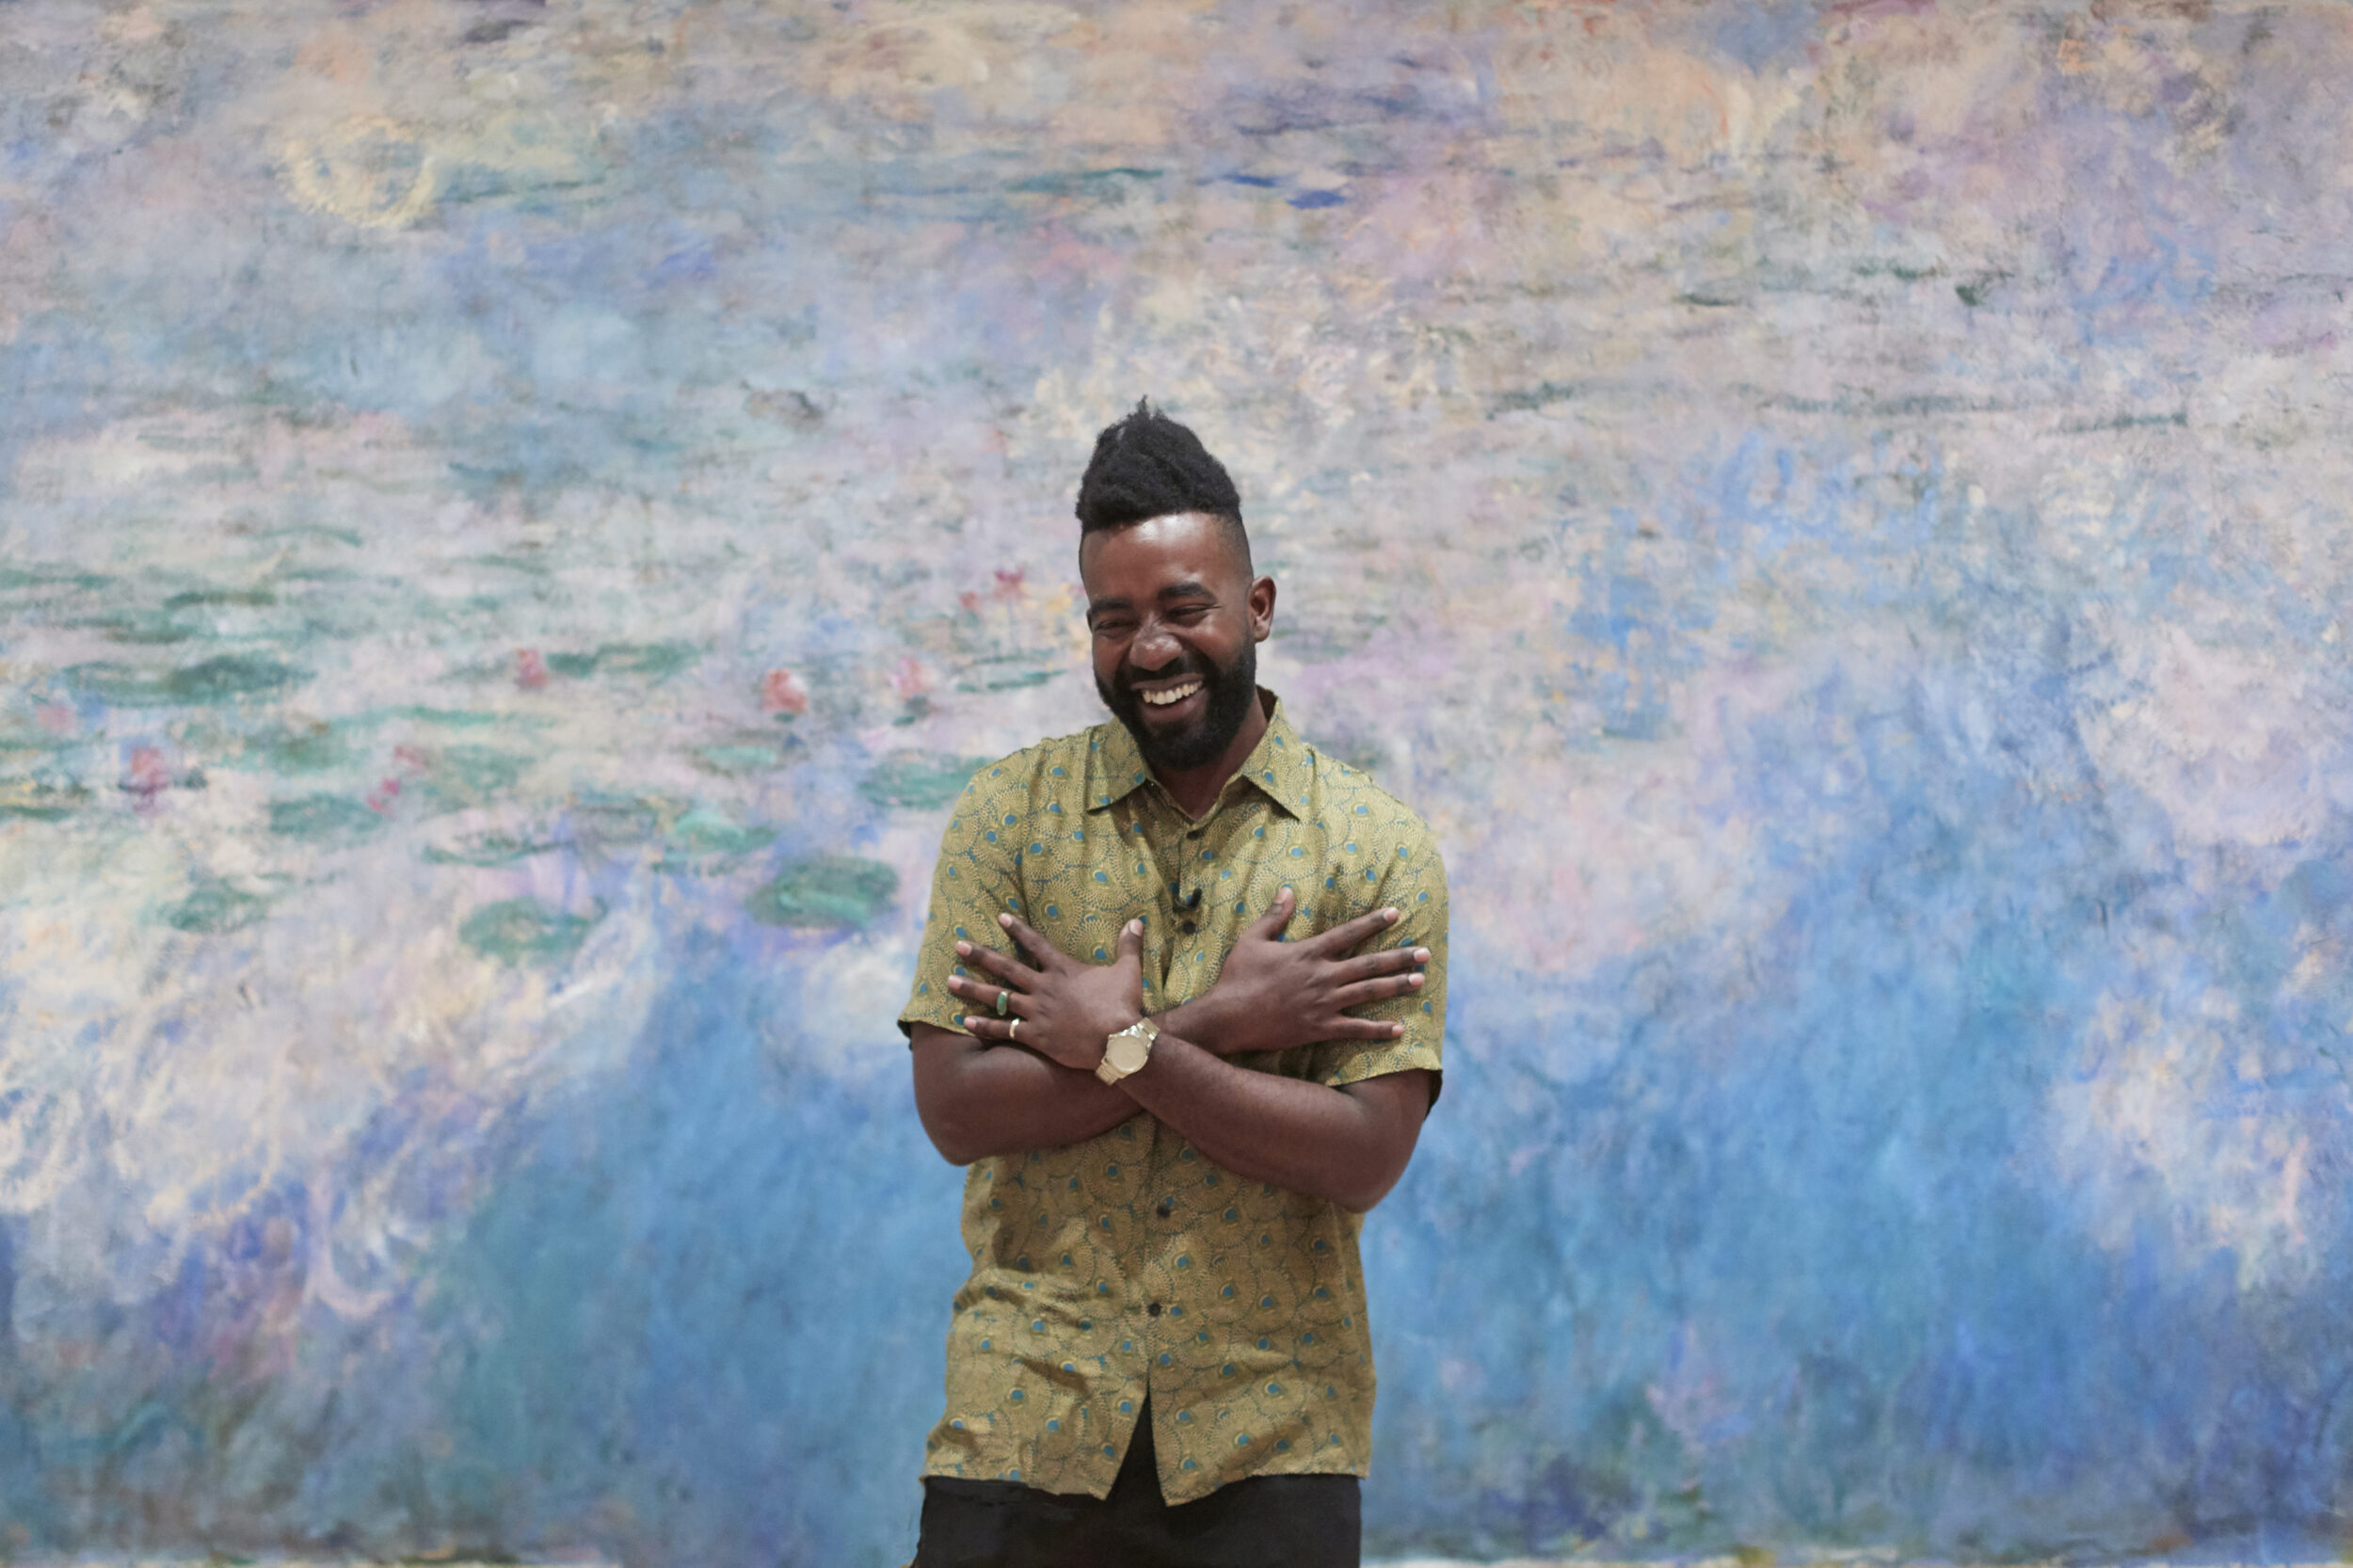 Security guard smiles in a thank you posture in front of Monet's Water Lilies painting at MoMA